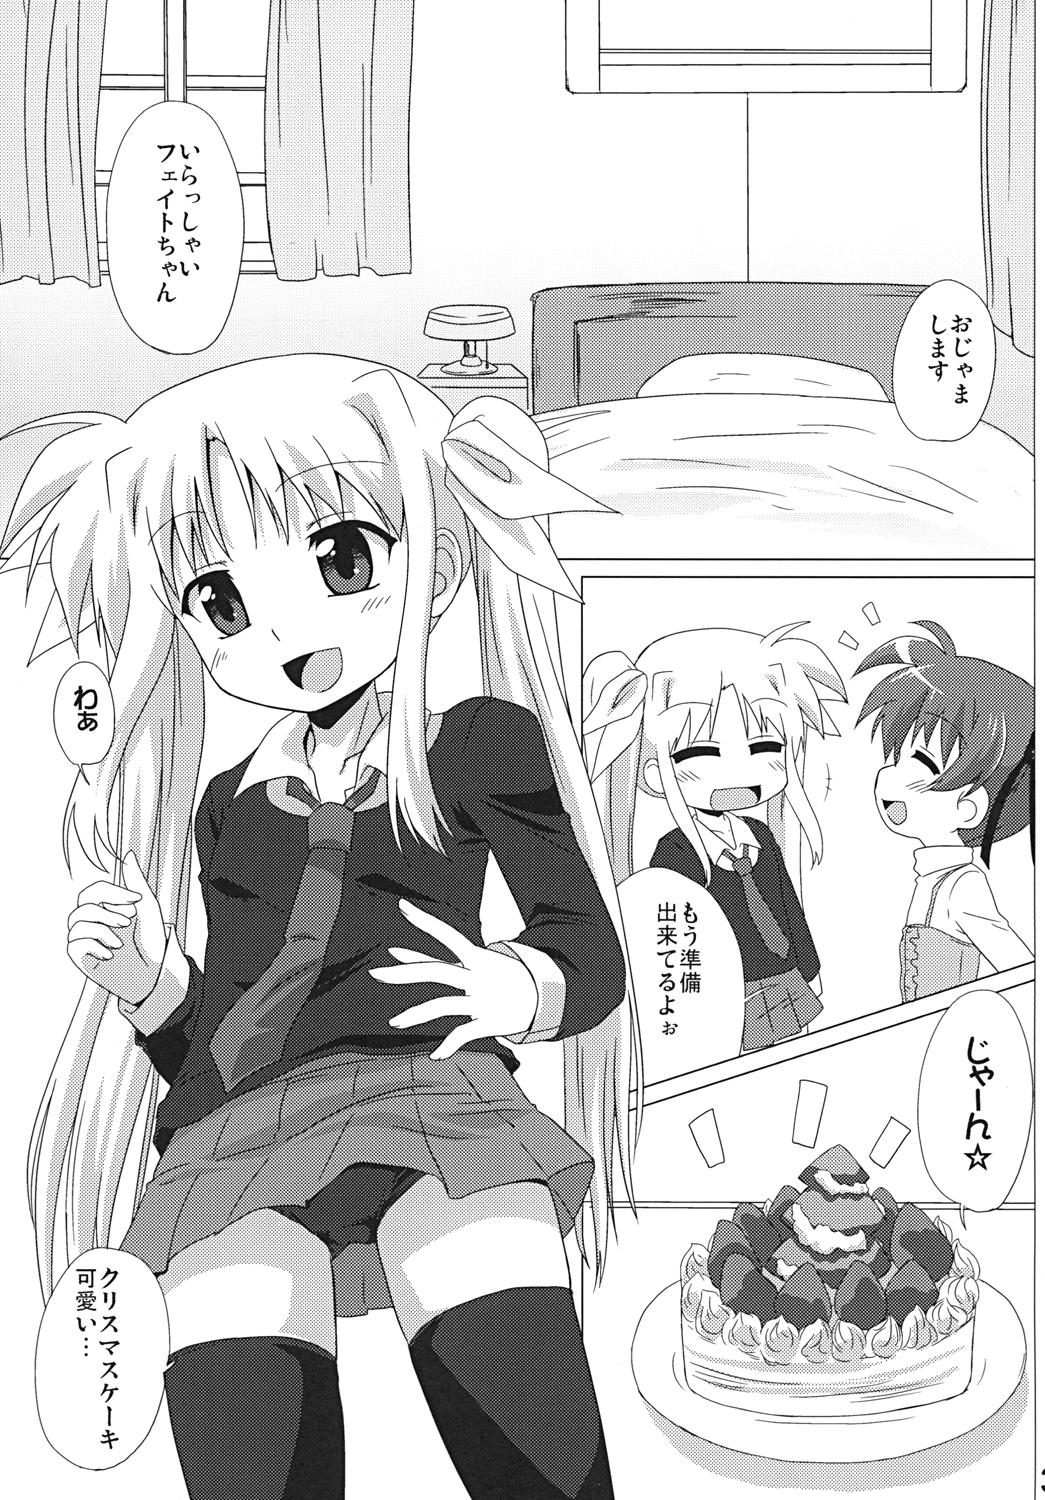 Perfect Pussy bliss of life - Mahou shoujo lyrical nanoha Tight Cunt - Page 2